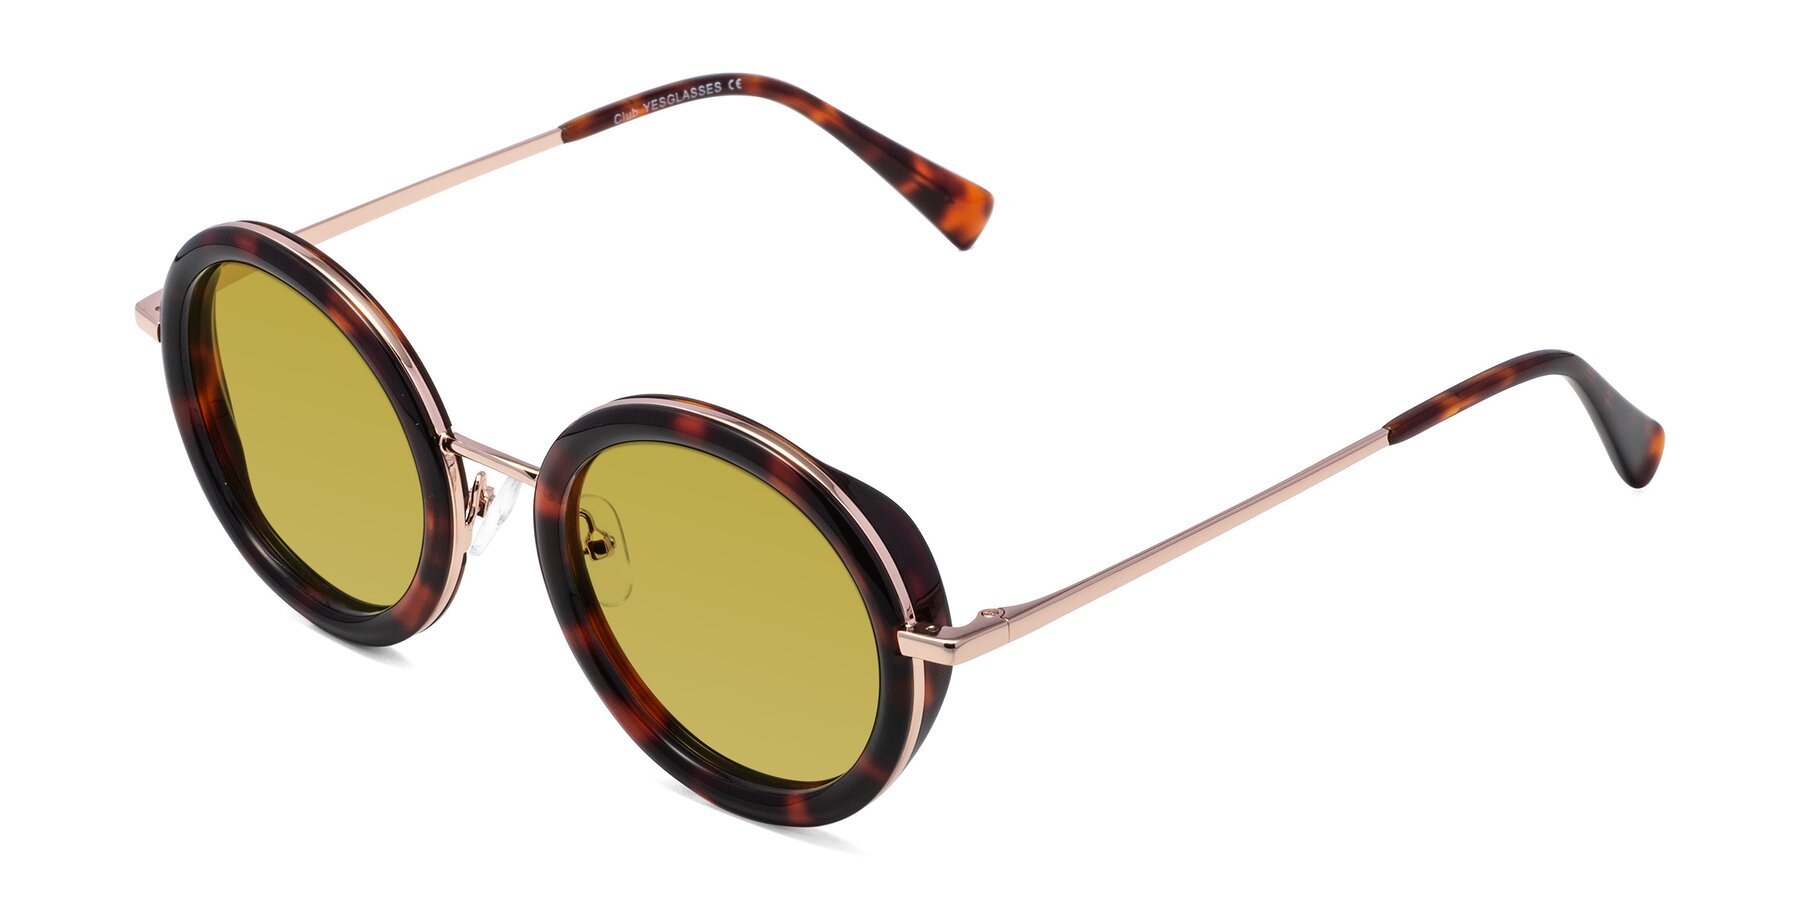 Angle of Club in Tortoise-Rose Gold with Champagne Tinted Lenses